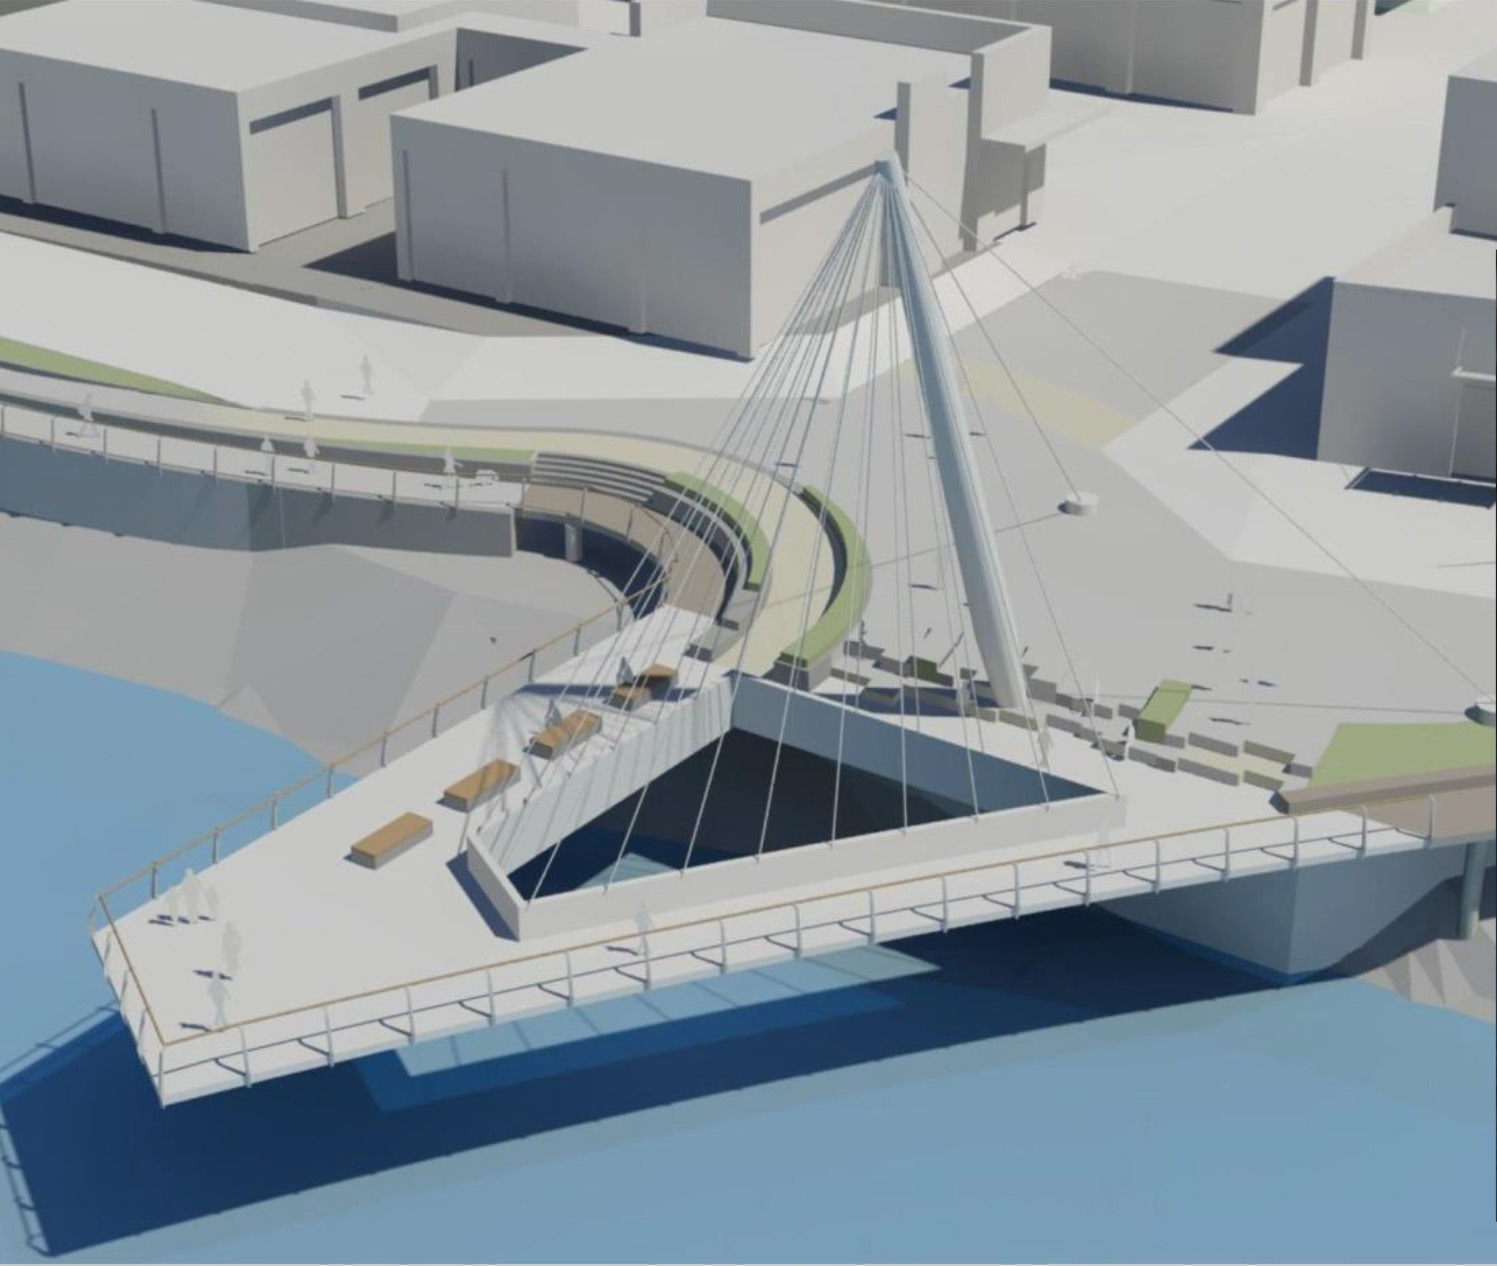 This cable-suspended pier will be the centerpiece of the 7-acre city park at the waterfront development in downtown Vancouver. Work on the pier will begin with construction of a cofferdam this winter.